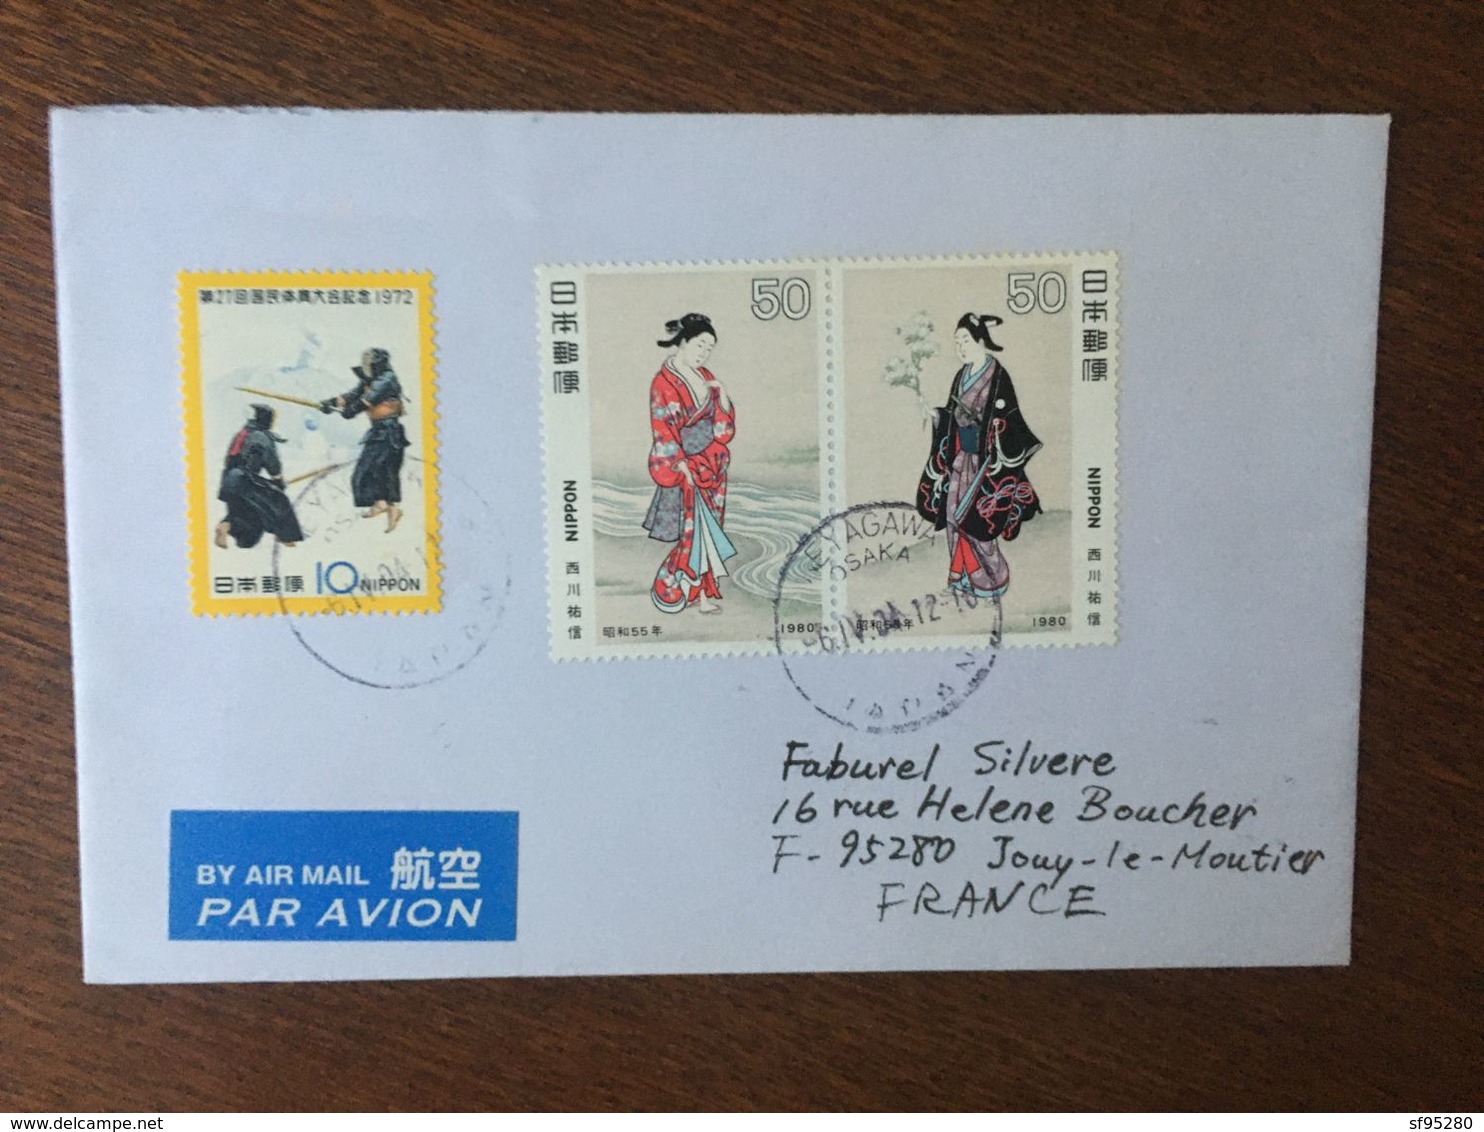 JAPON TIMBRES 1068 1323 1324 - Covers & Documents